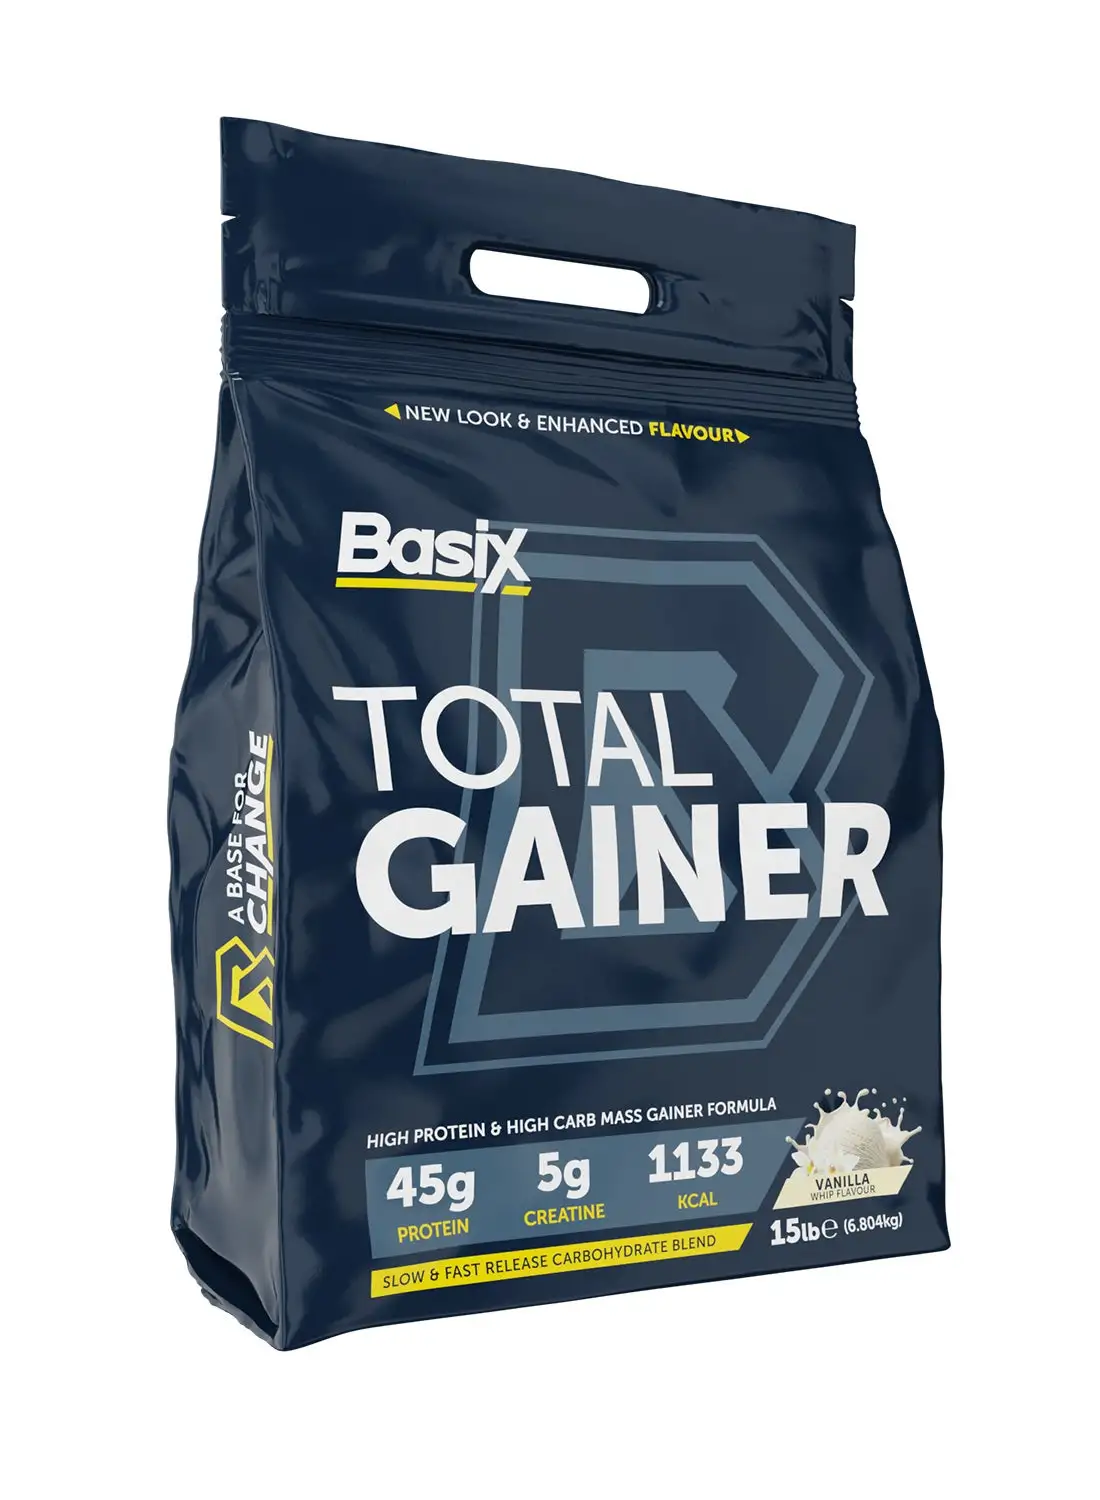 Basix Total Gainer High protein & Carb Mass Gainer Formula Vanilla Whip 15 Lb